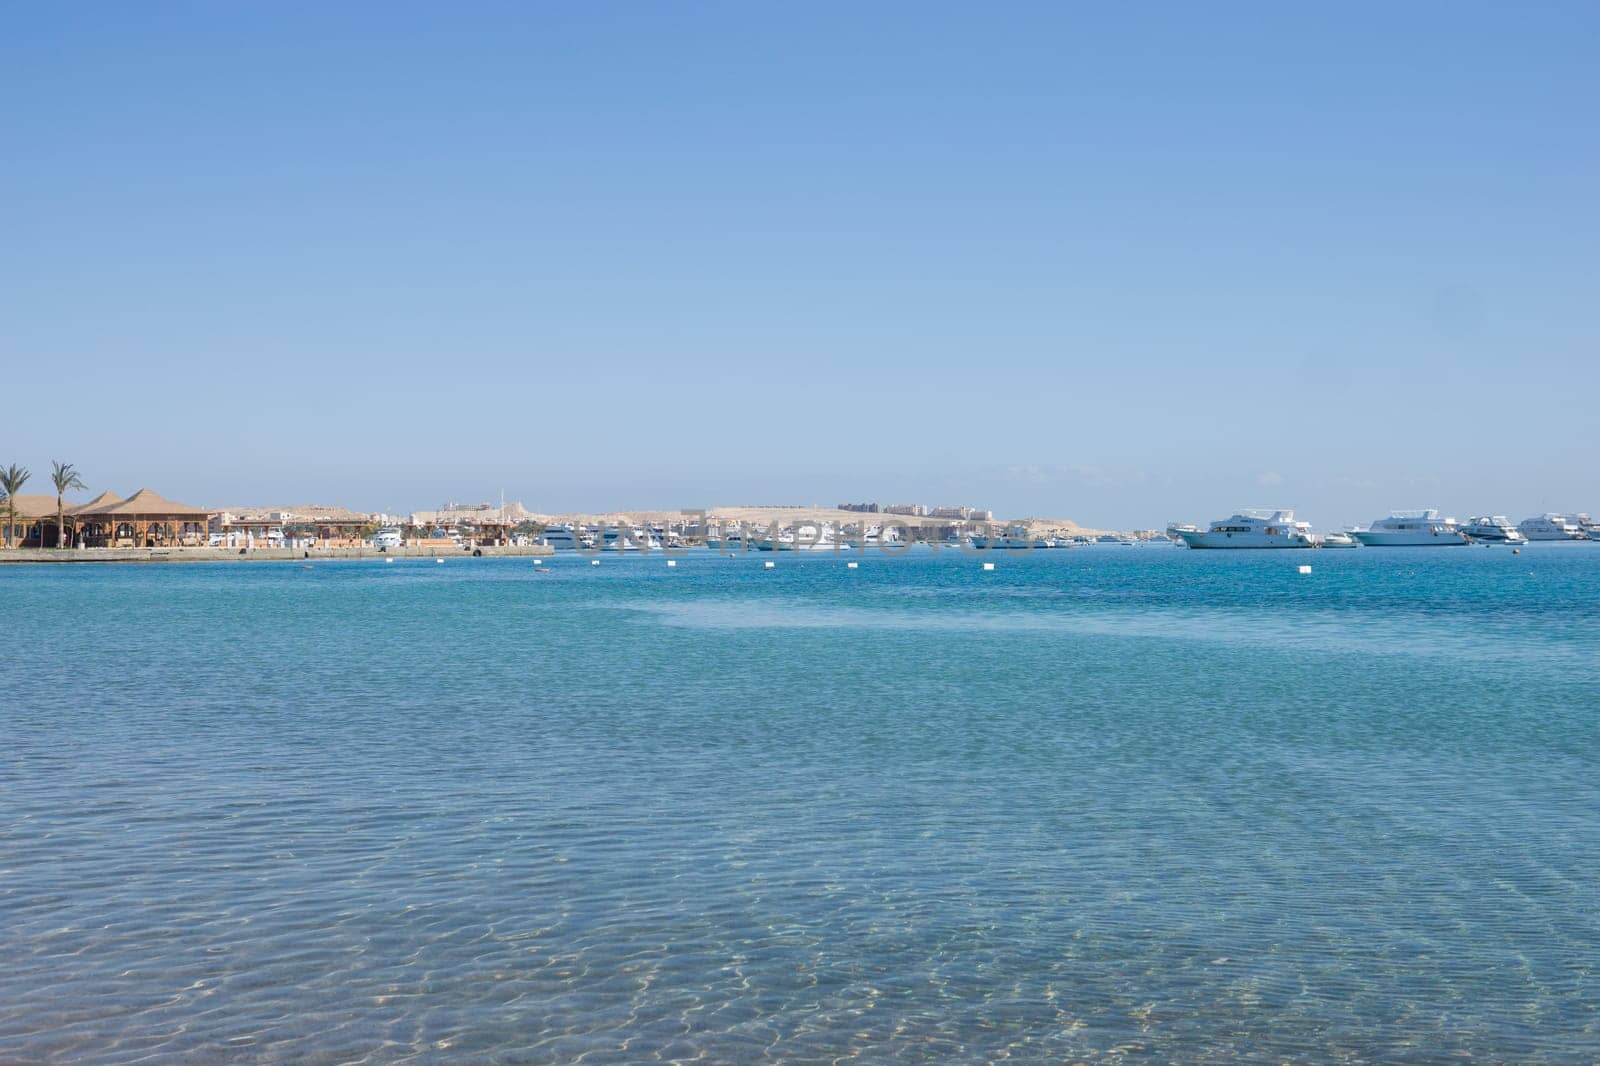 Beach Relaxation at the Red Sea. Fairy-tale Moments of a Sunny Day. The concept of tourism and sea travel.